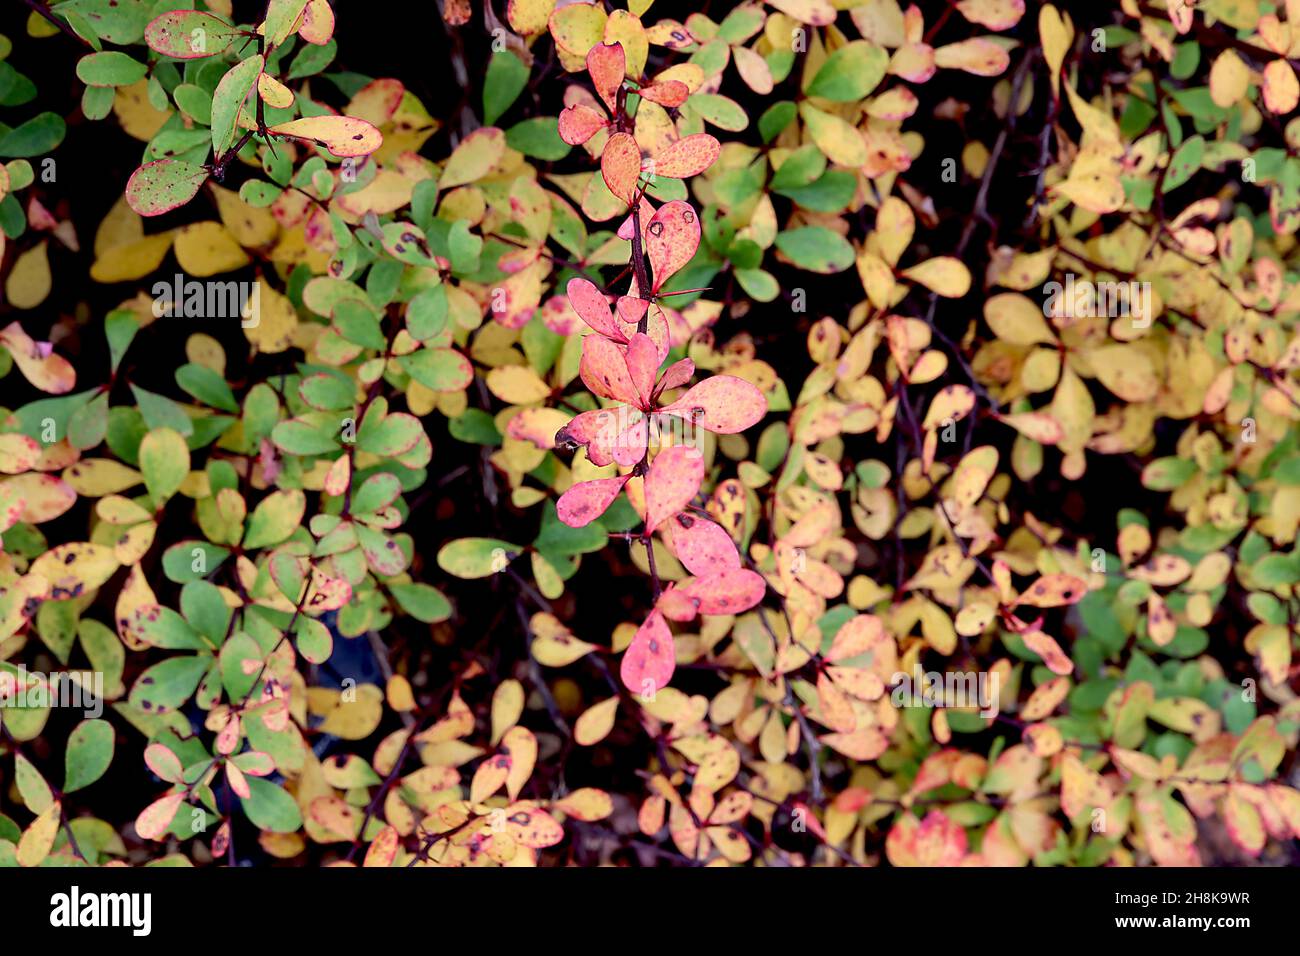 Berberis amurensis var quelpaertensis Amur barberry – ovate and obovate closely packed yellow and mid green leaves with red margins,  November, UK Stock Photo